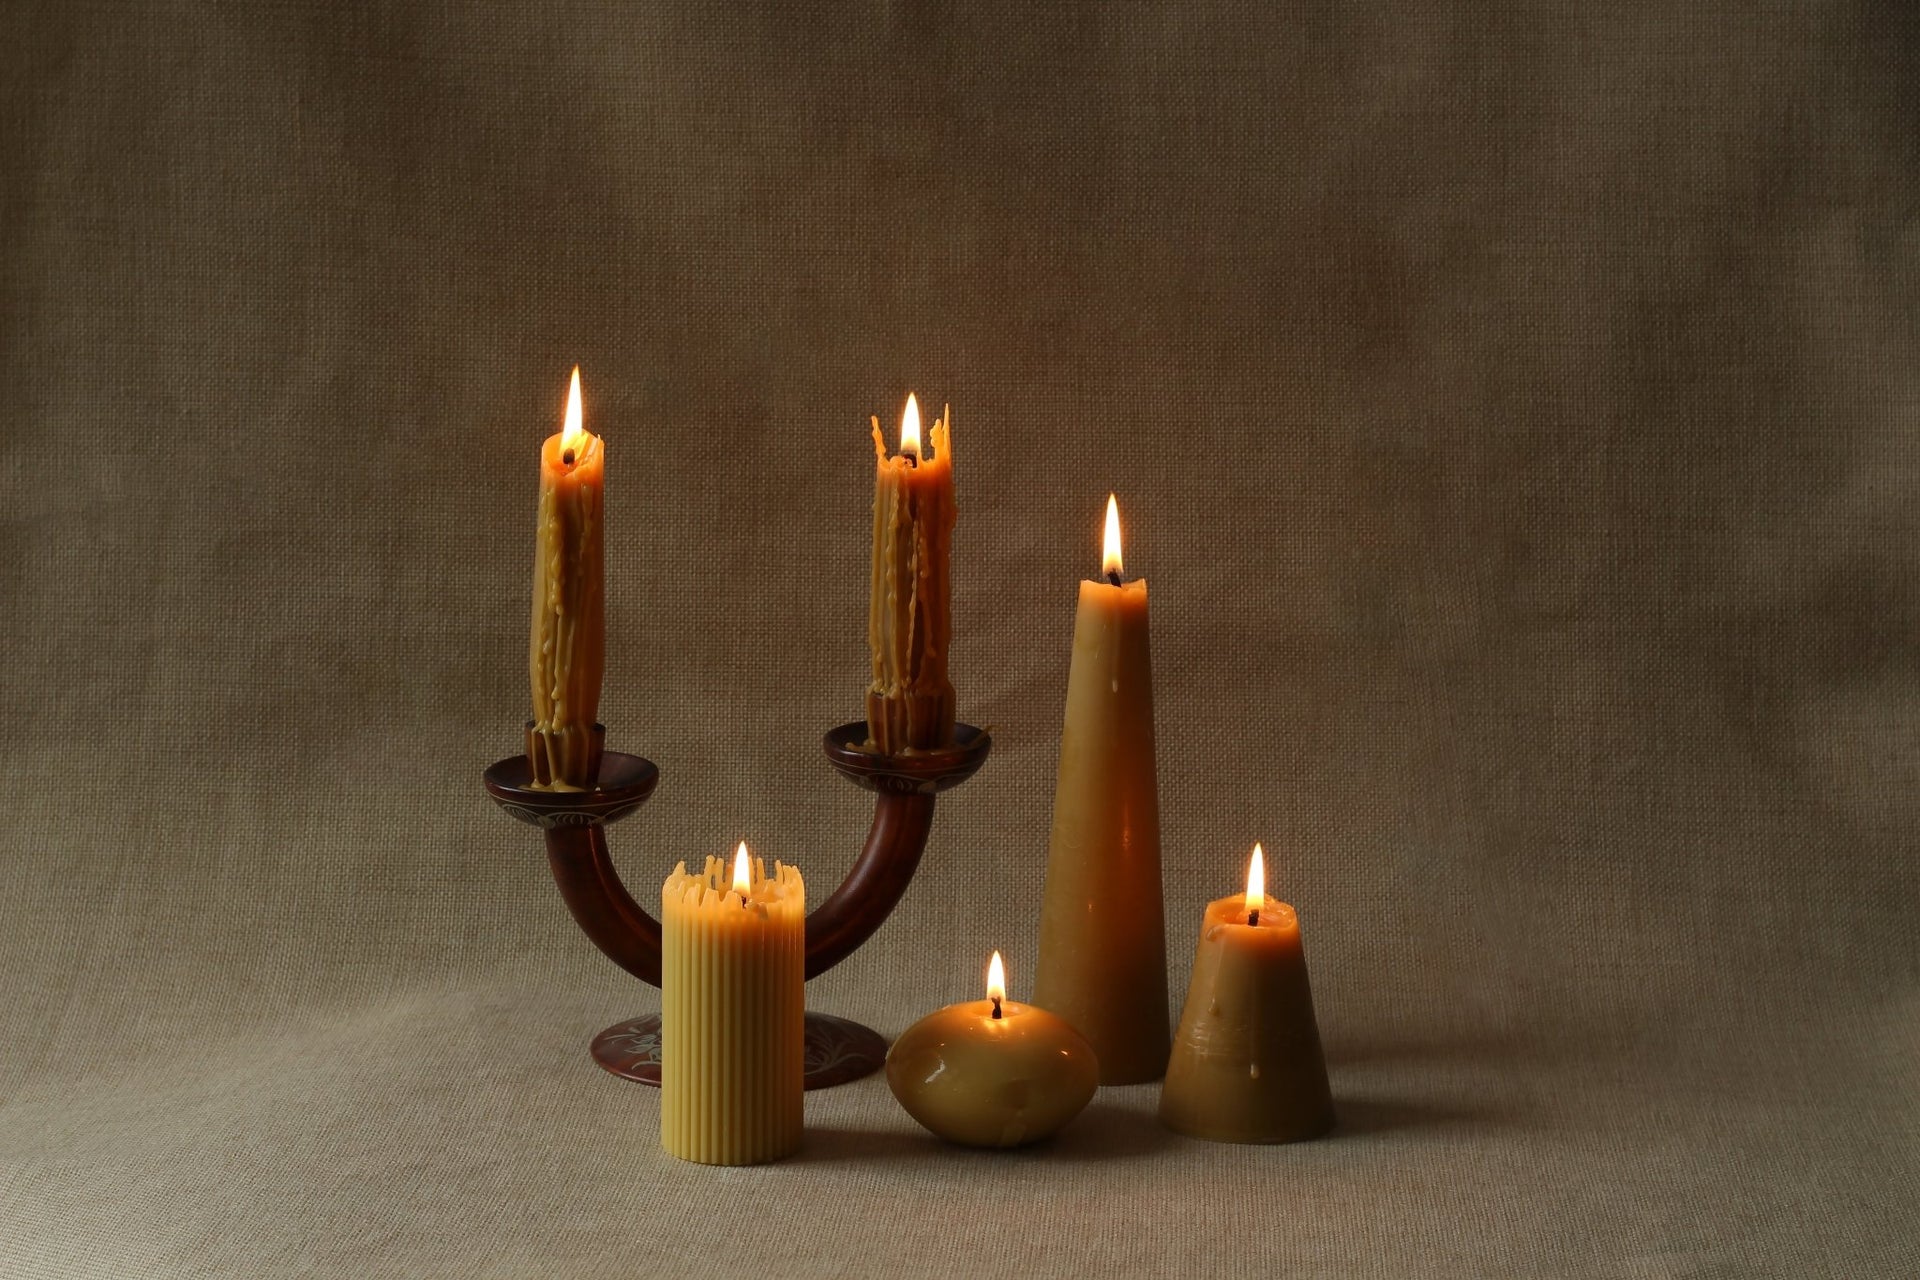 Beeswax Candle Care: A Guide to Caring for and Burning Beeswax